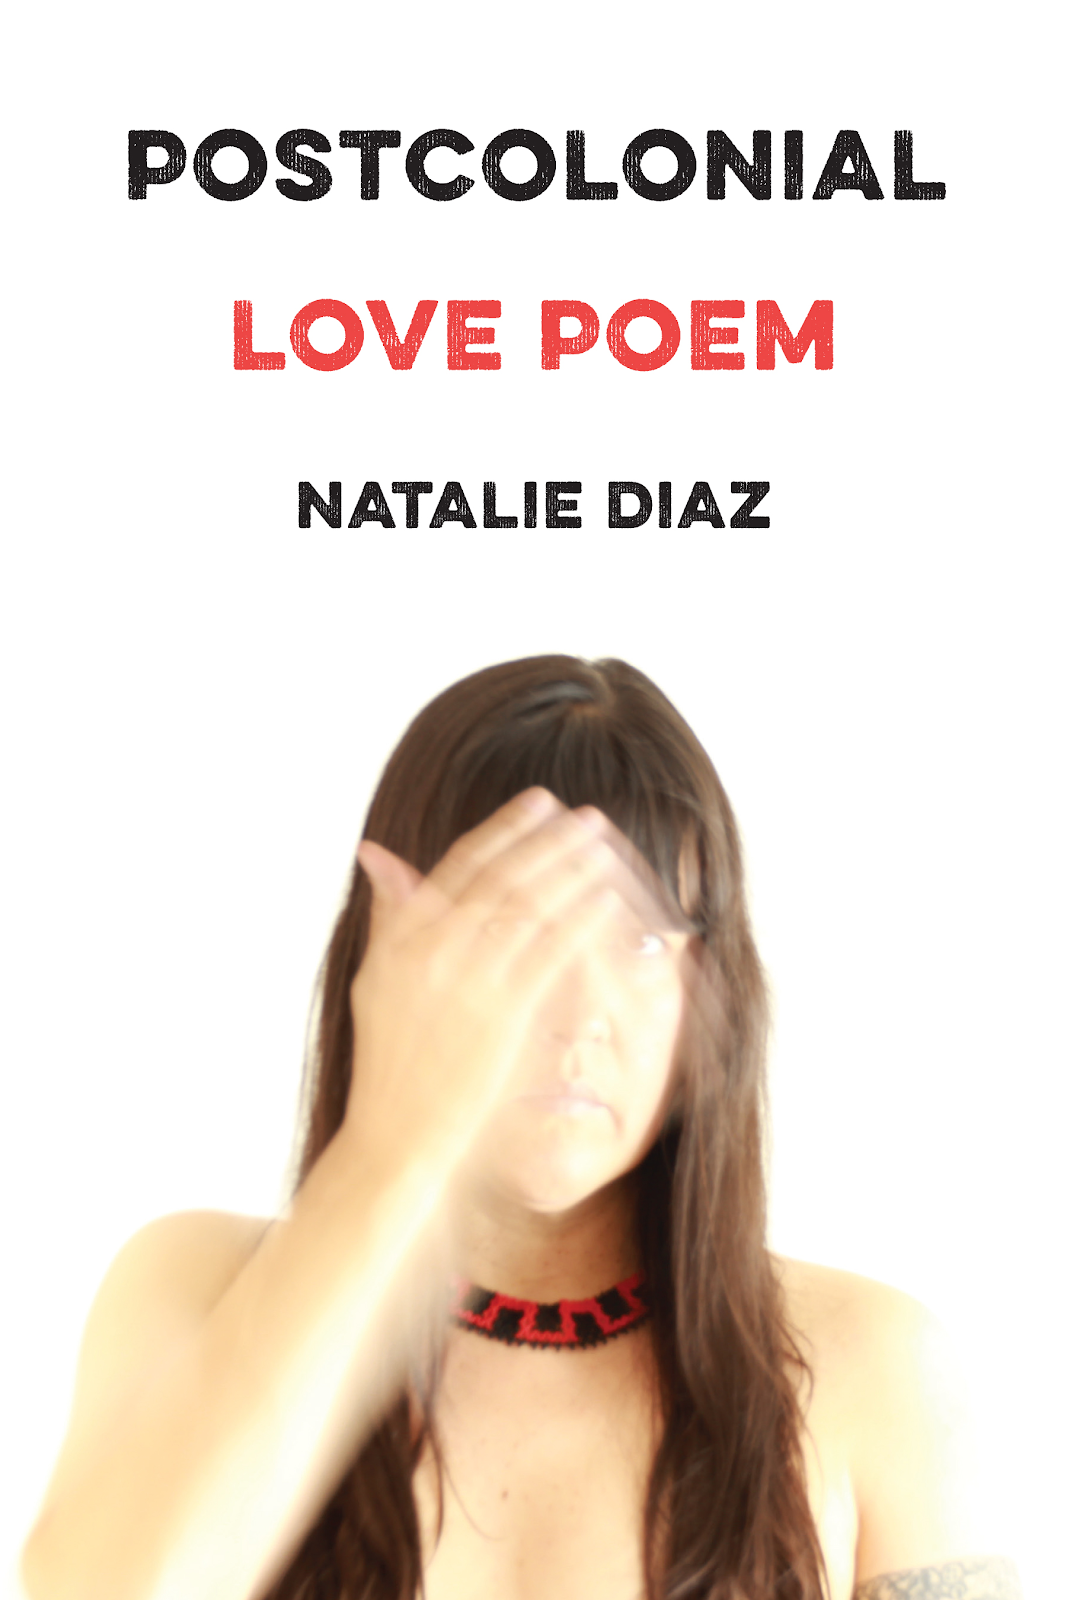 Cover of "Postcolonial Love Poem" by Natalie Diaz: a woman with long dark hair, half-obscuring her face with her blurry hand